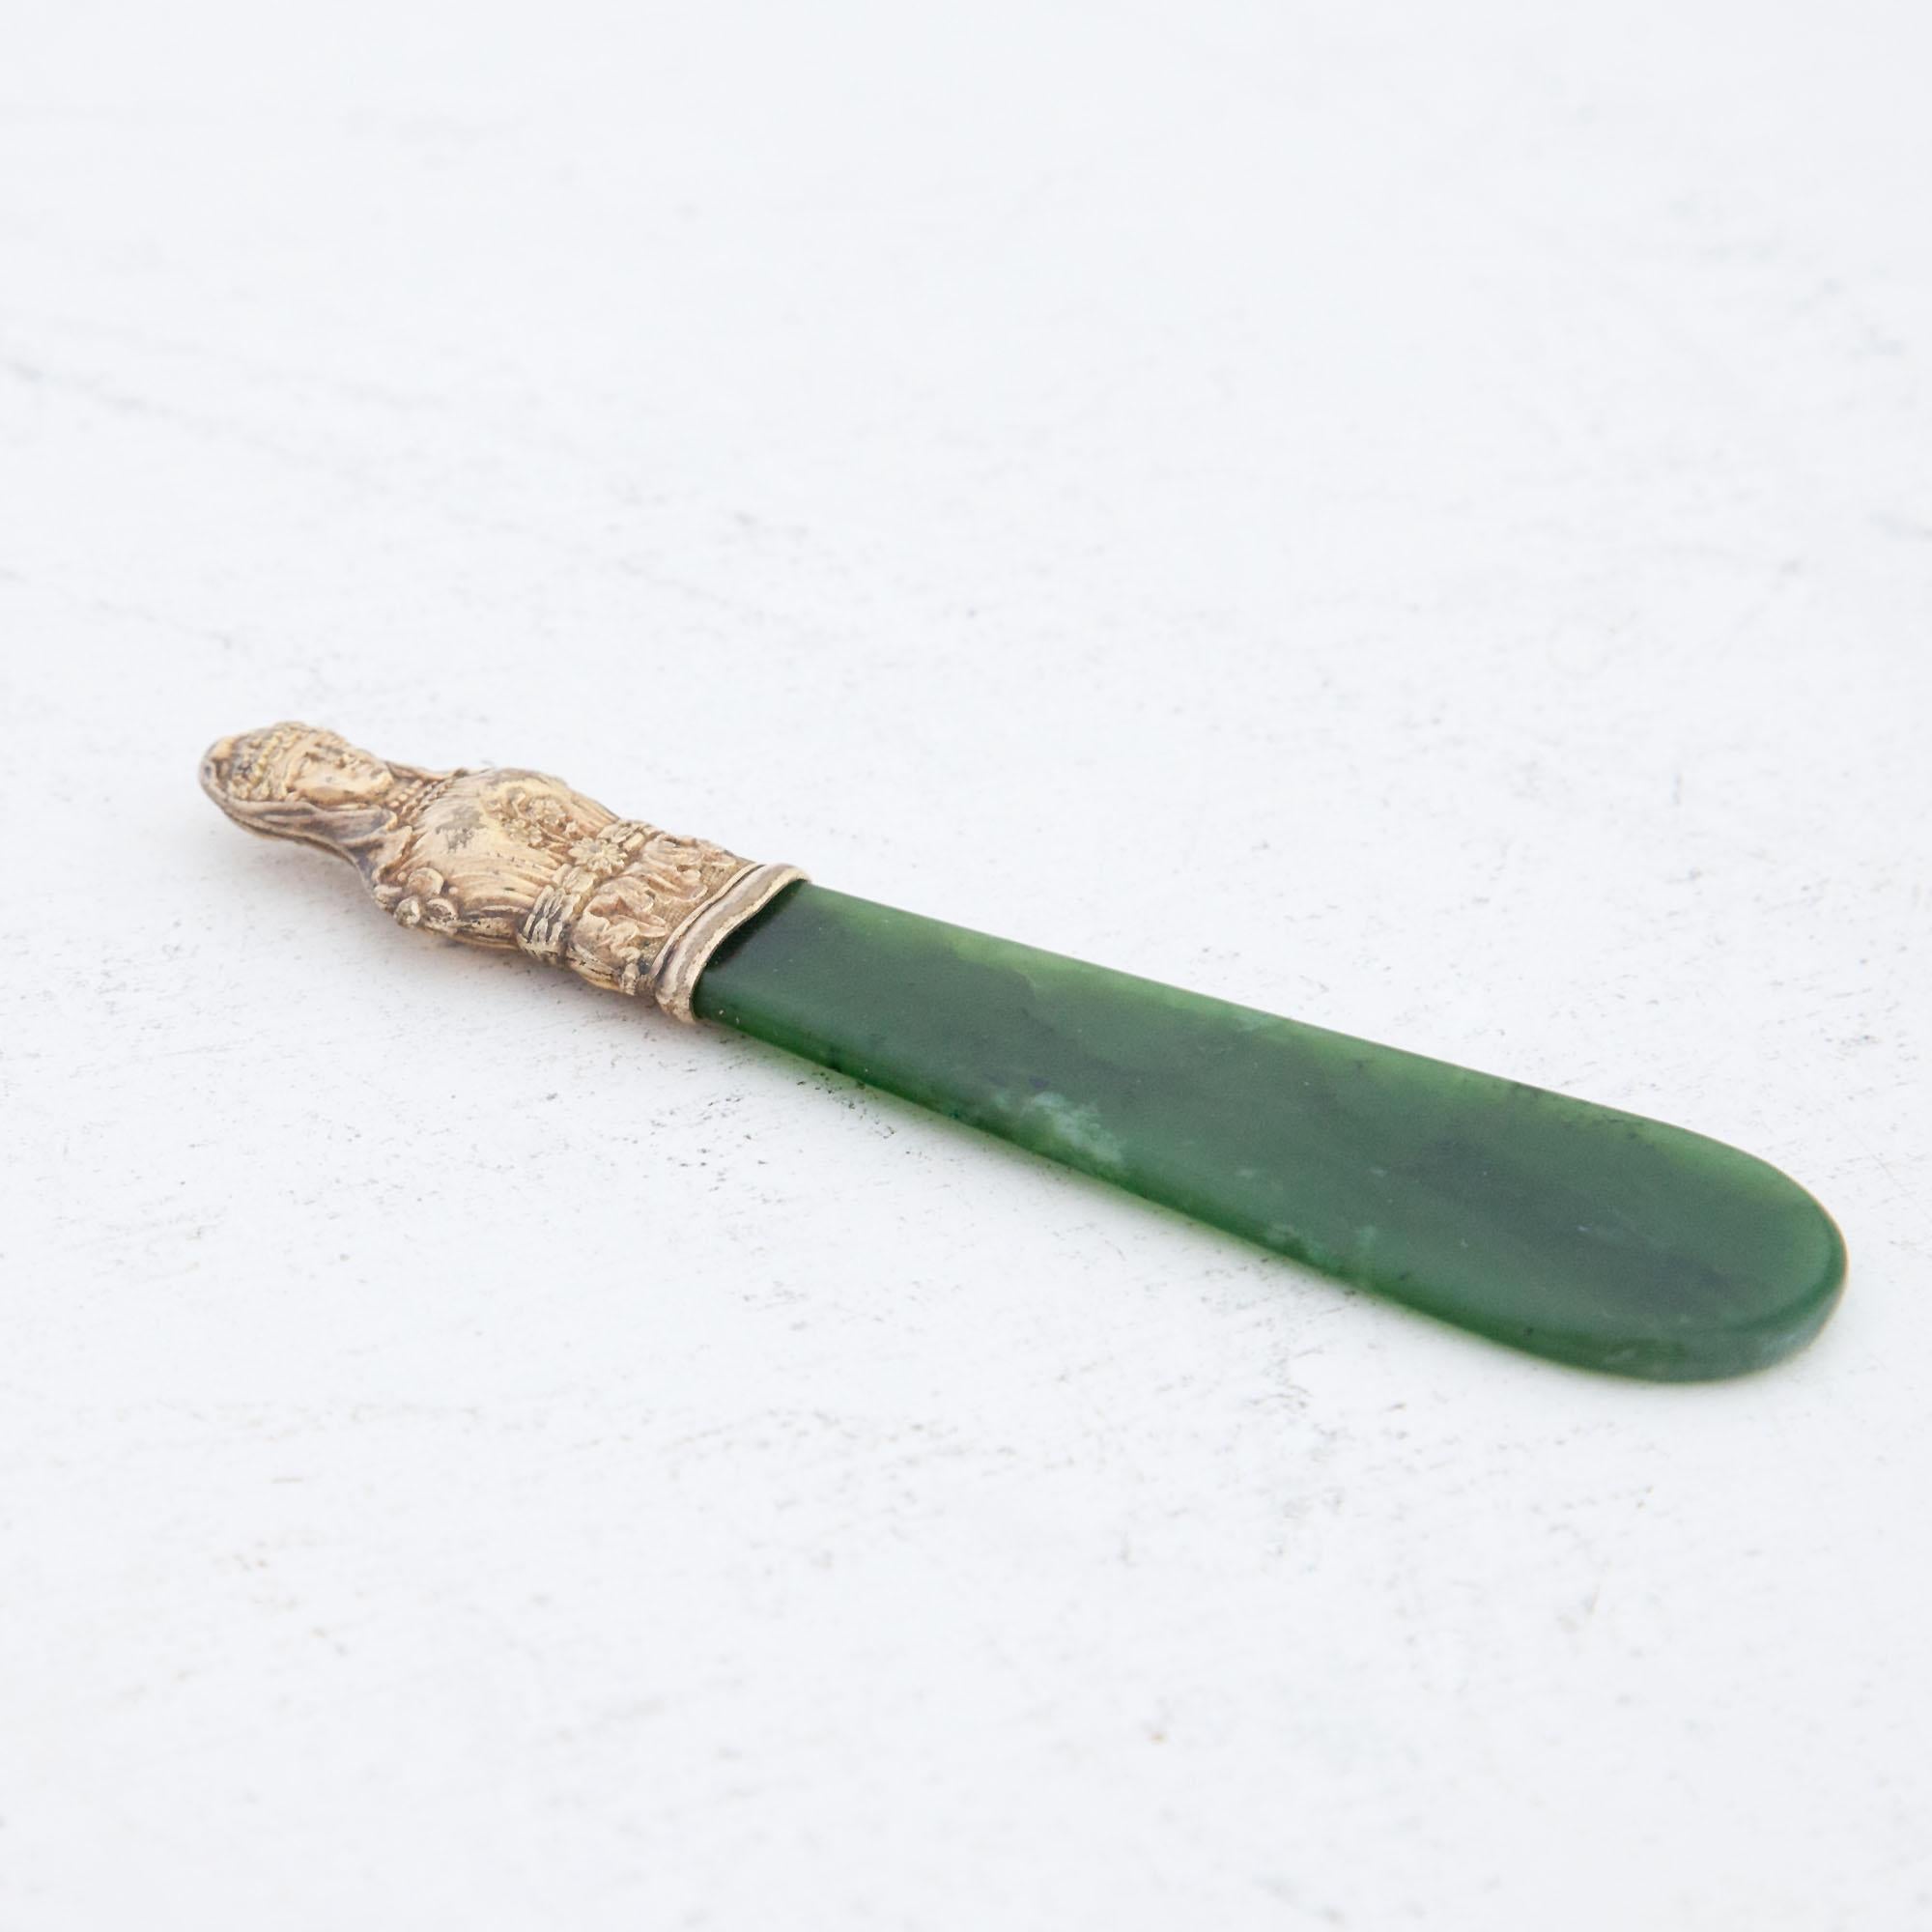 Stone Nephrite Caviar Knife, Probably, Russia, First Half of the 19th Century